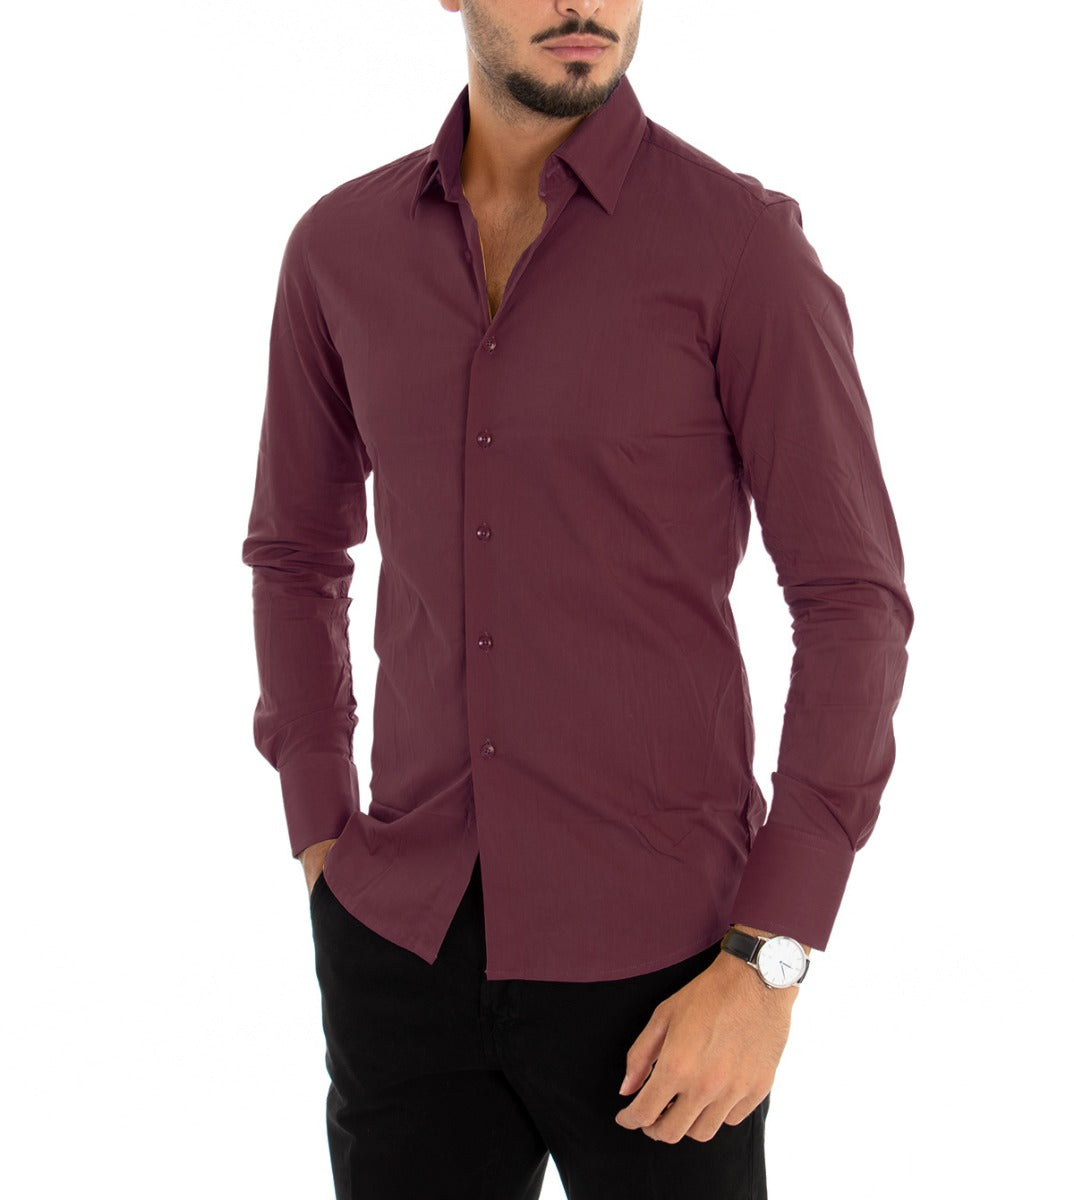 Men's Shirt With Collar Long Sleeve Slim Fit Basic Casual Cotton Burgundy GIOSAL-C1814A